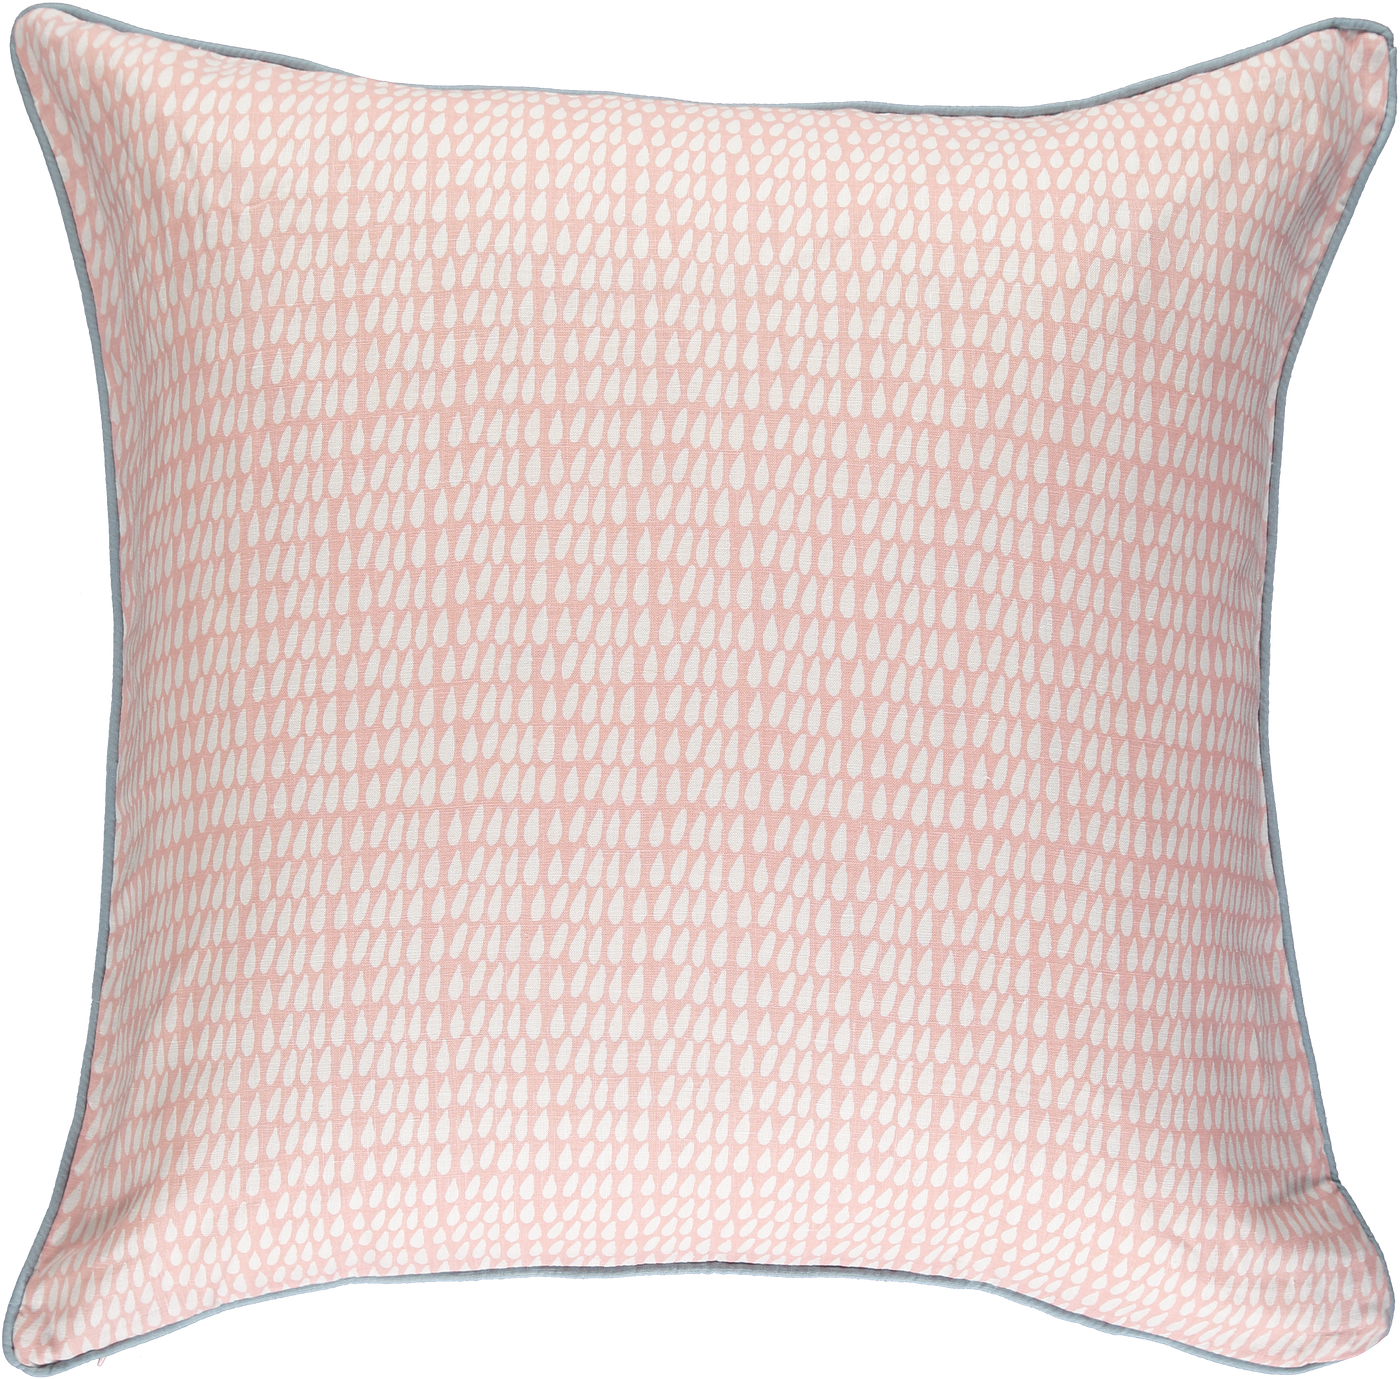 60 x 60cm Light pink linen cushion with white raindrop print and blue-grey piping.